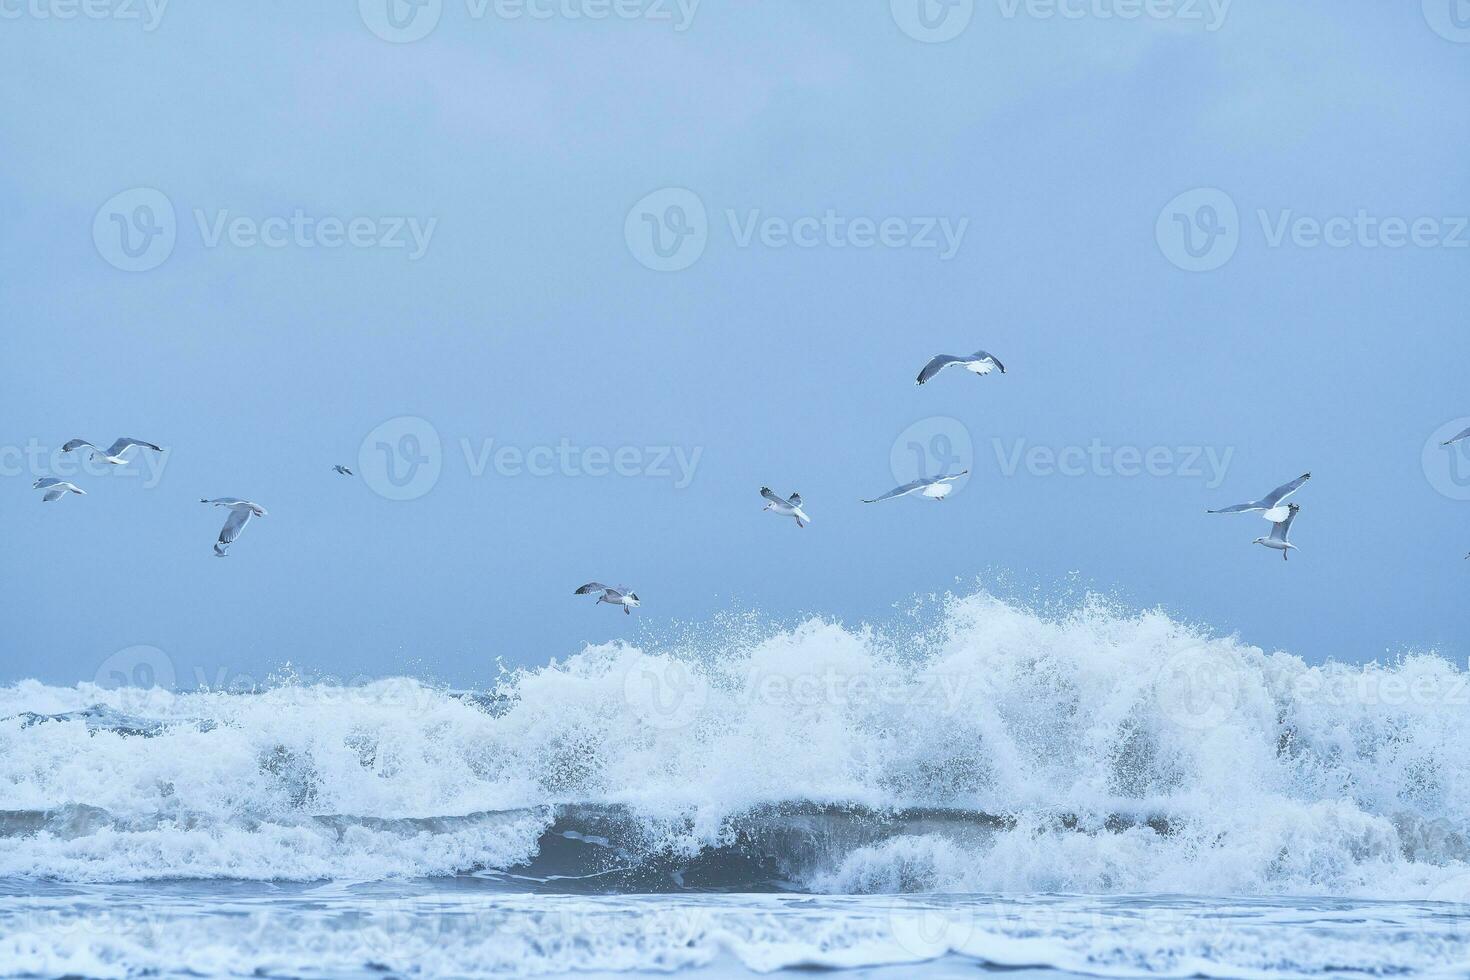 Seagulls flying over huge wave at the northern sea photo